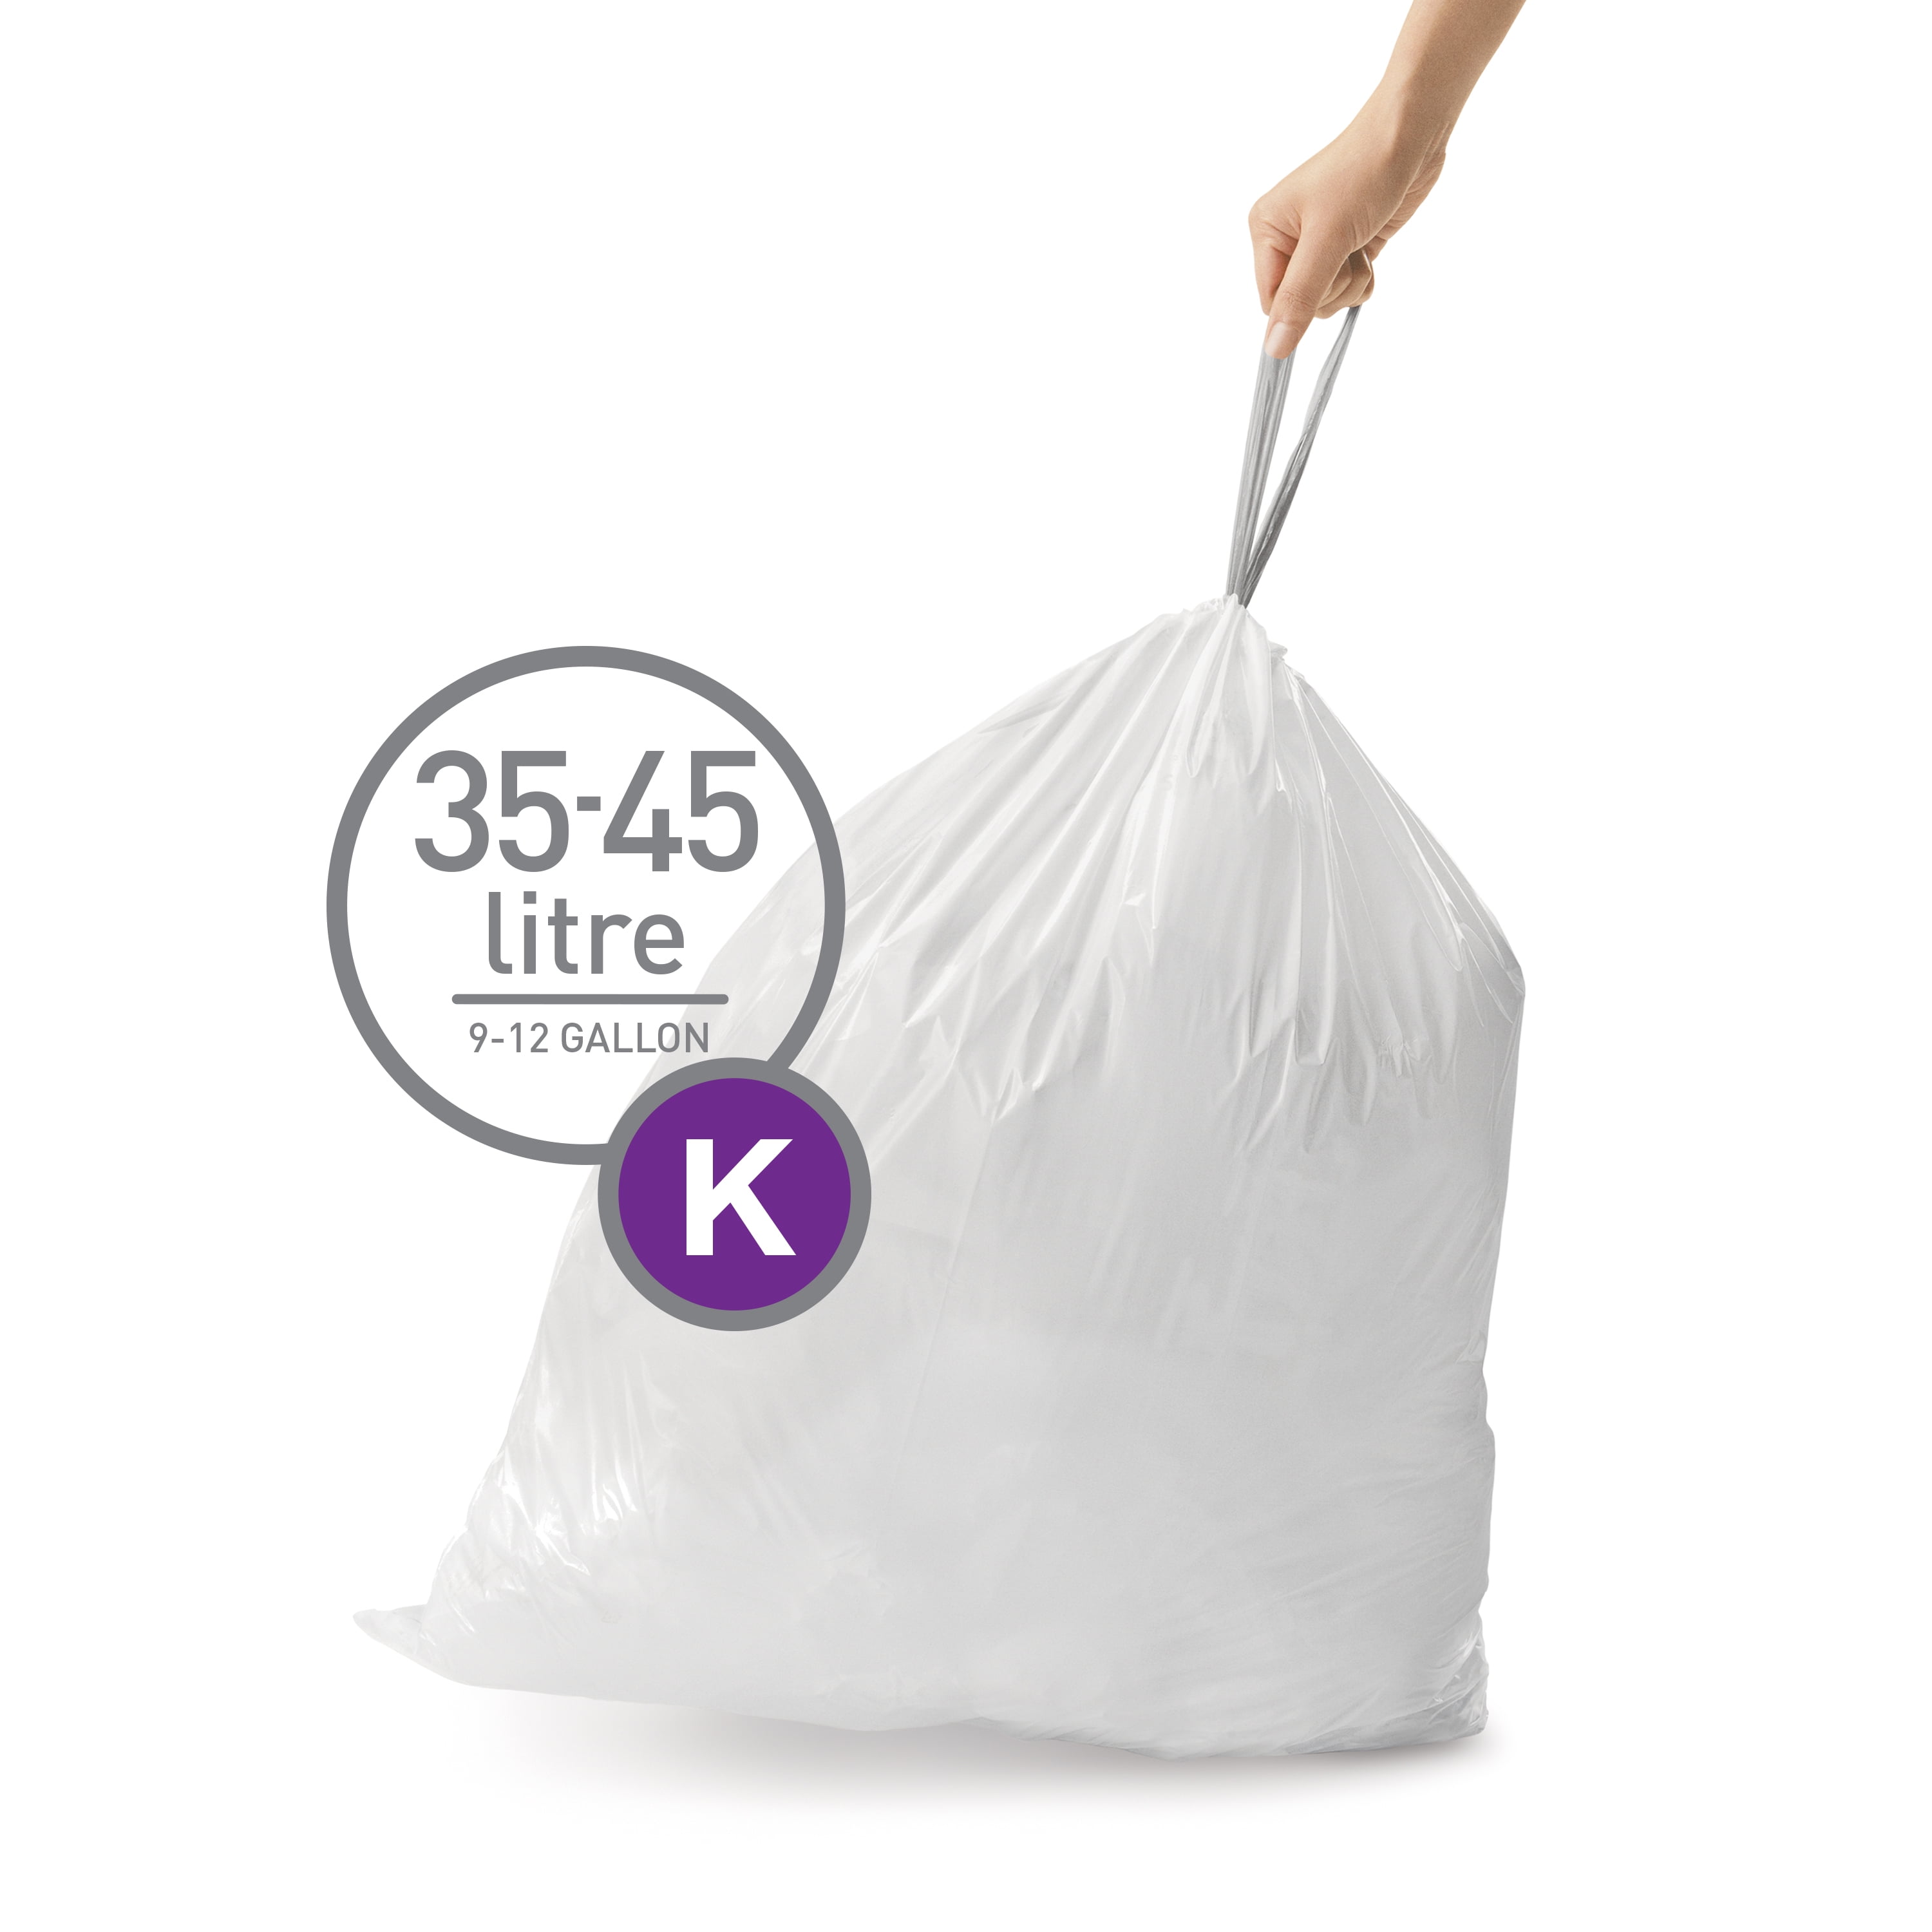  Compatible with Simplehuman Code K 200 Count. MADE IN THE USA.  Eco-Friendly. Durable Custom Plastic Trash Bags w/Drawstring, 35-45 Liter/  9-12 Gallon Trash Cans : Health & Household